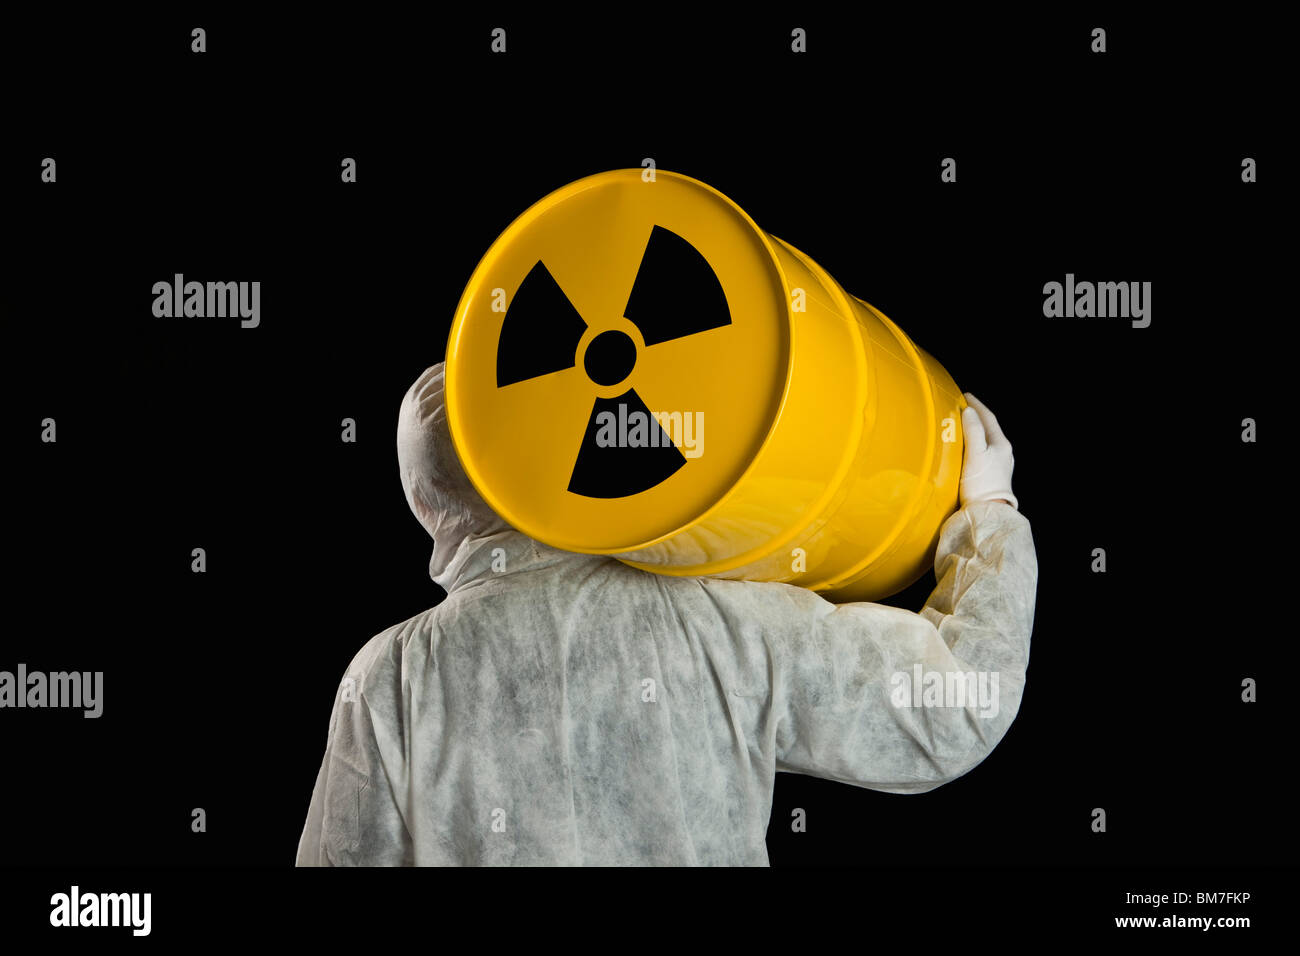 A Person Carrying A Radioactive Barrel Stock Photo